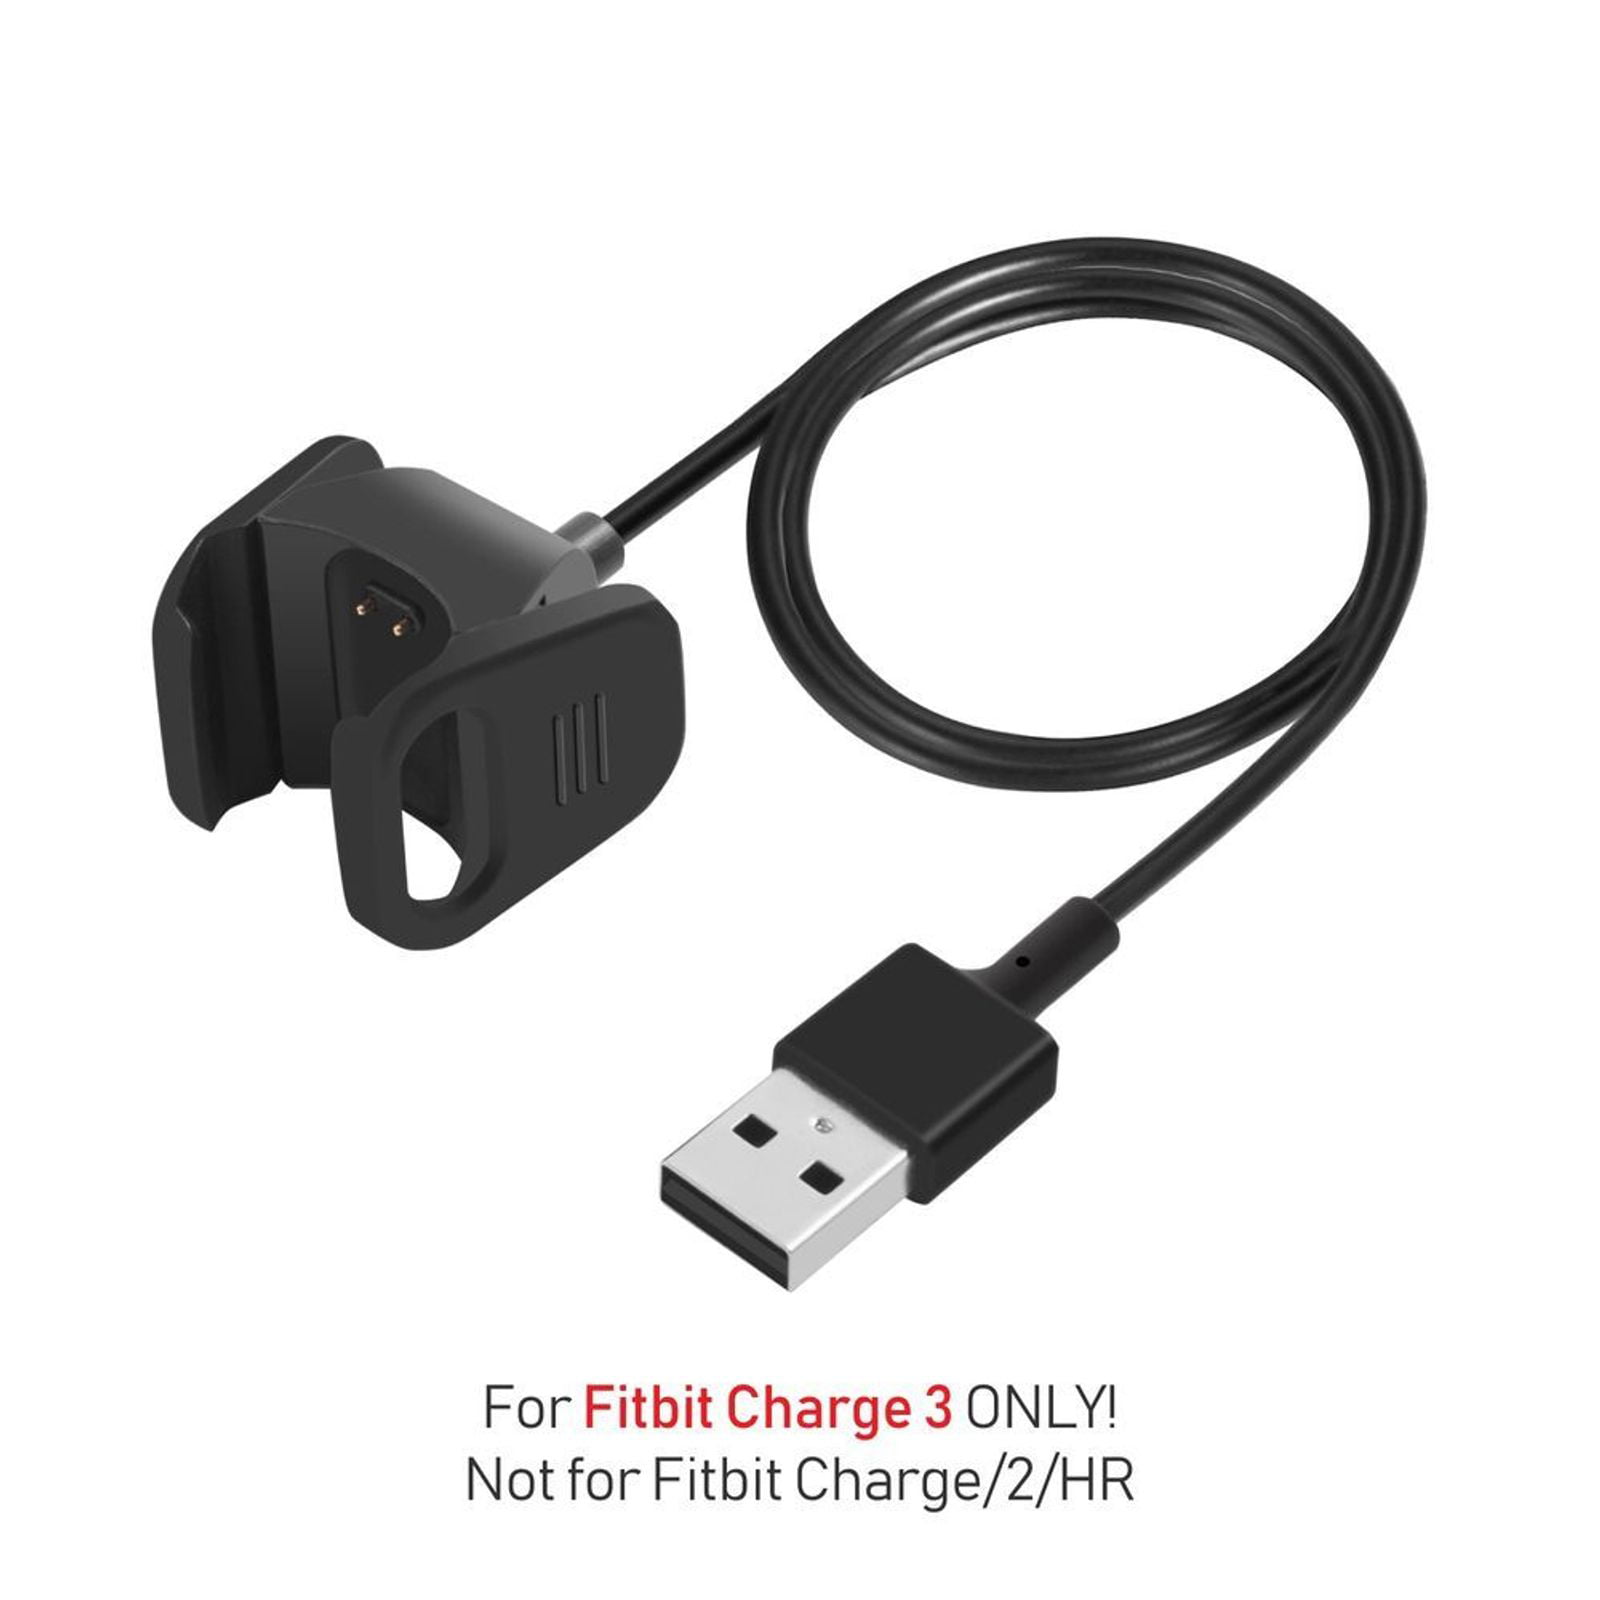 Durable USB Fast Charging Cable Cord Dock Cradle For Fitbit Charge 3 